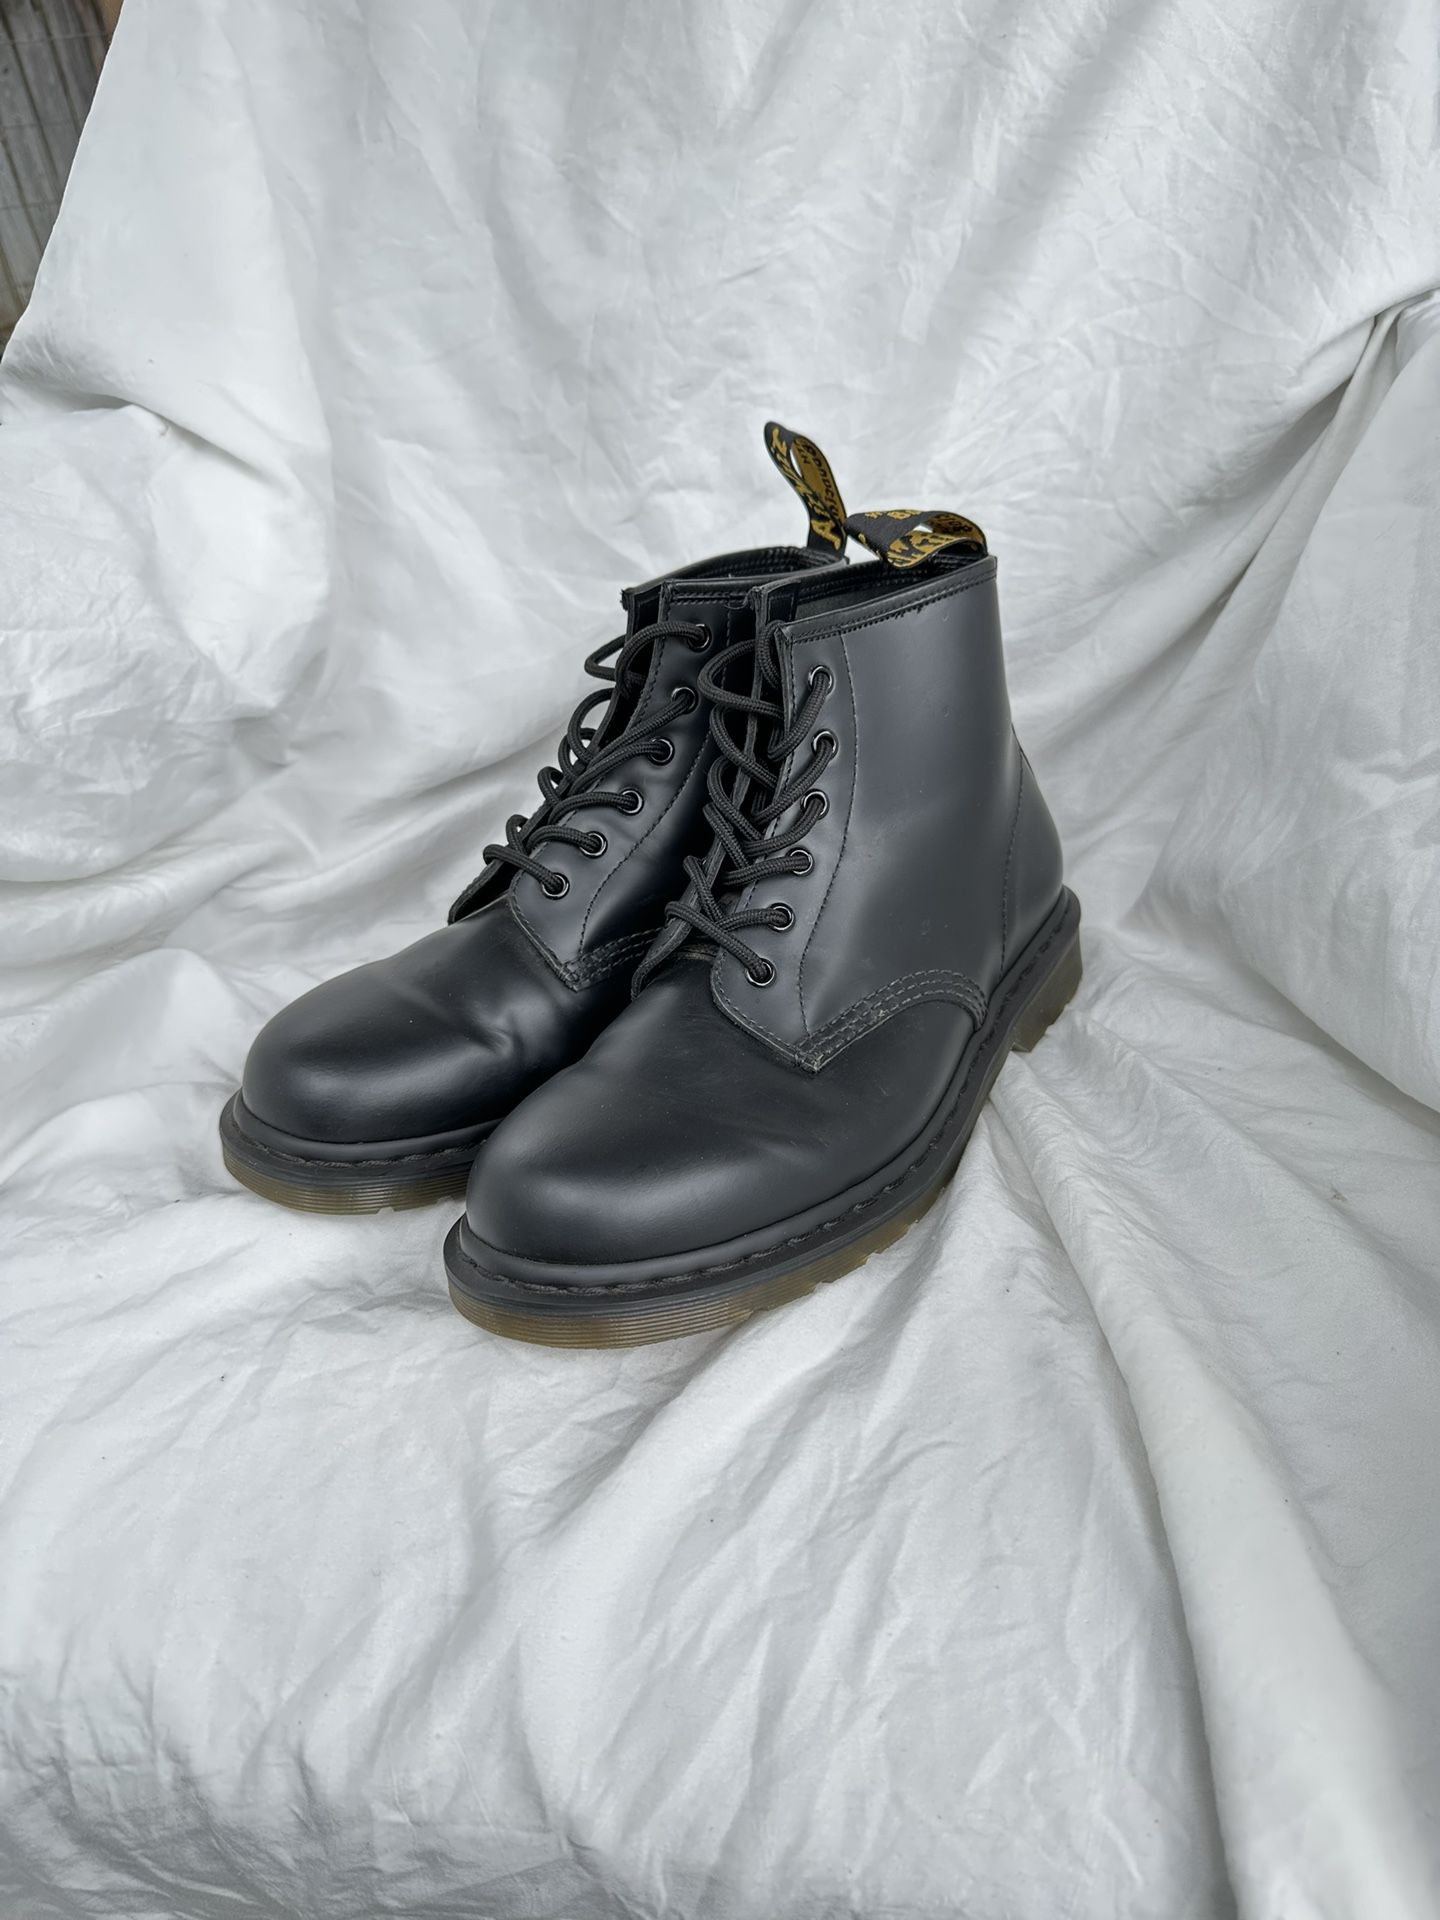 Dr Martens 101 Smooth Leather Ankle Boot- Size US Men’s 9 (UK 8) Monotone Black edition 